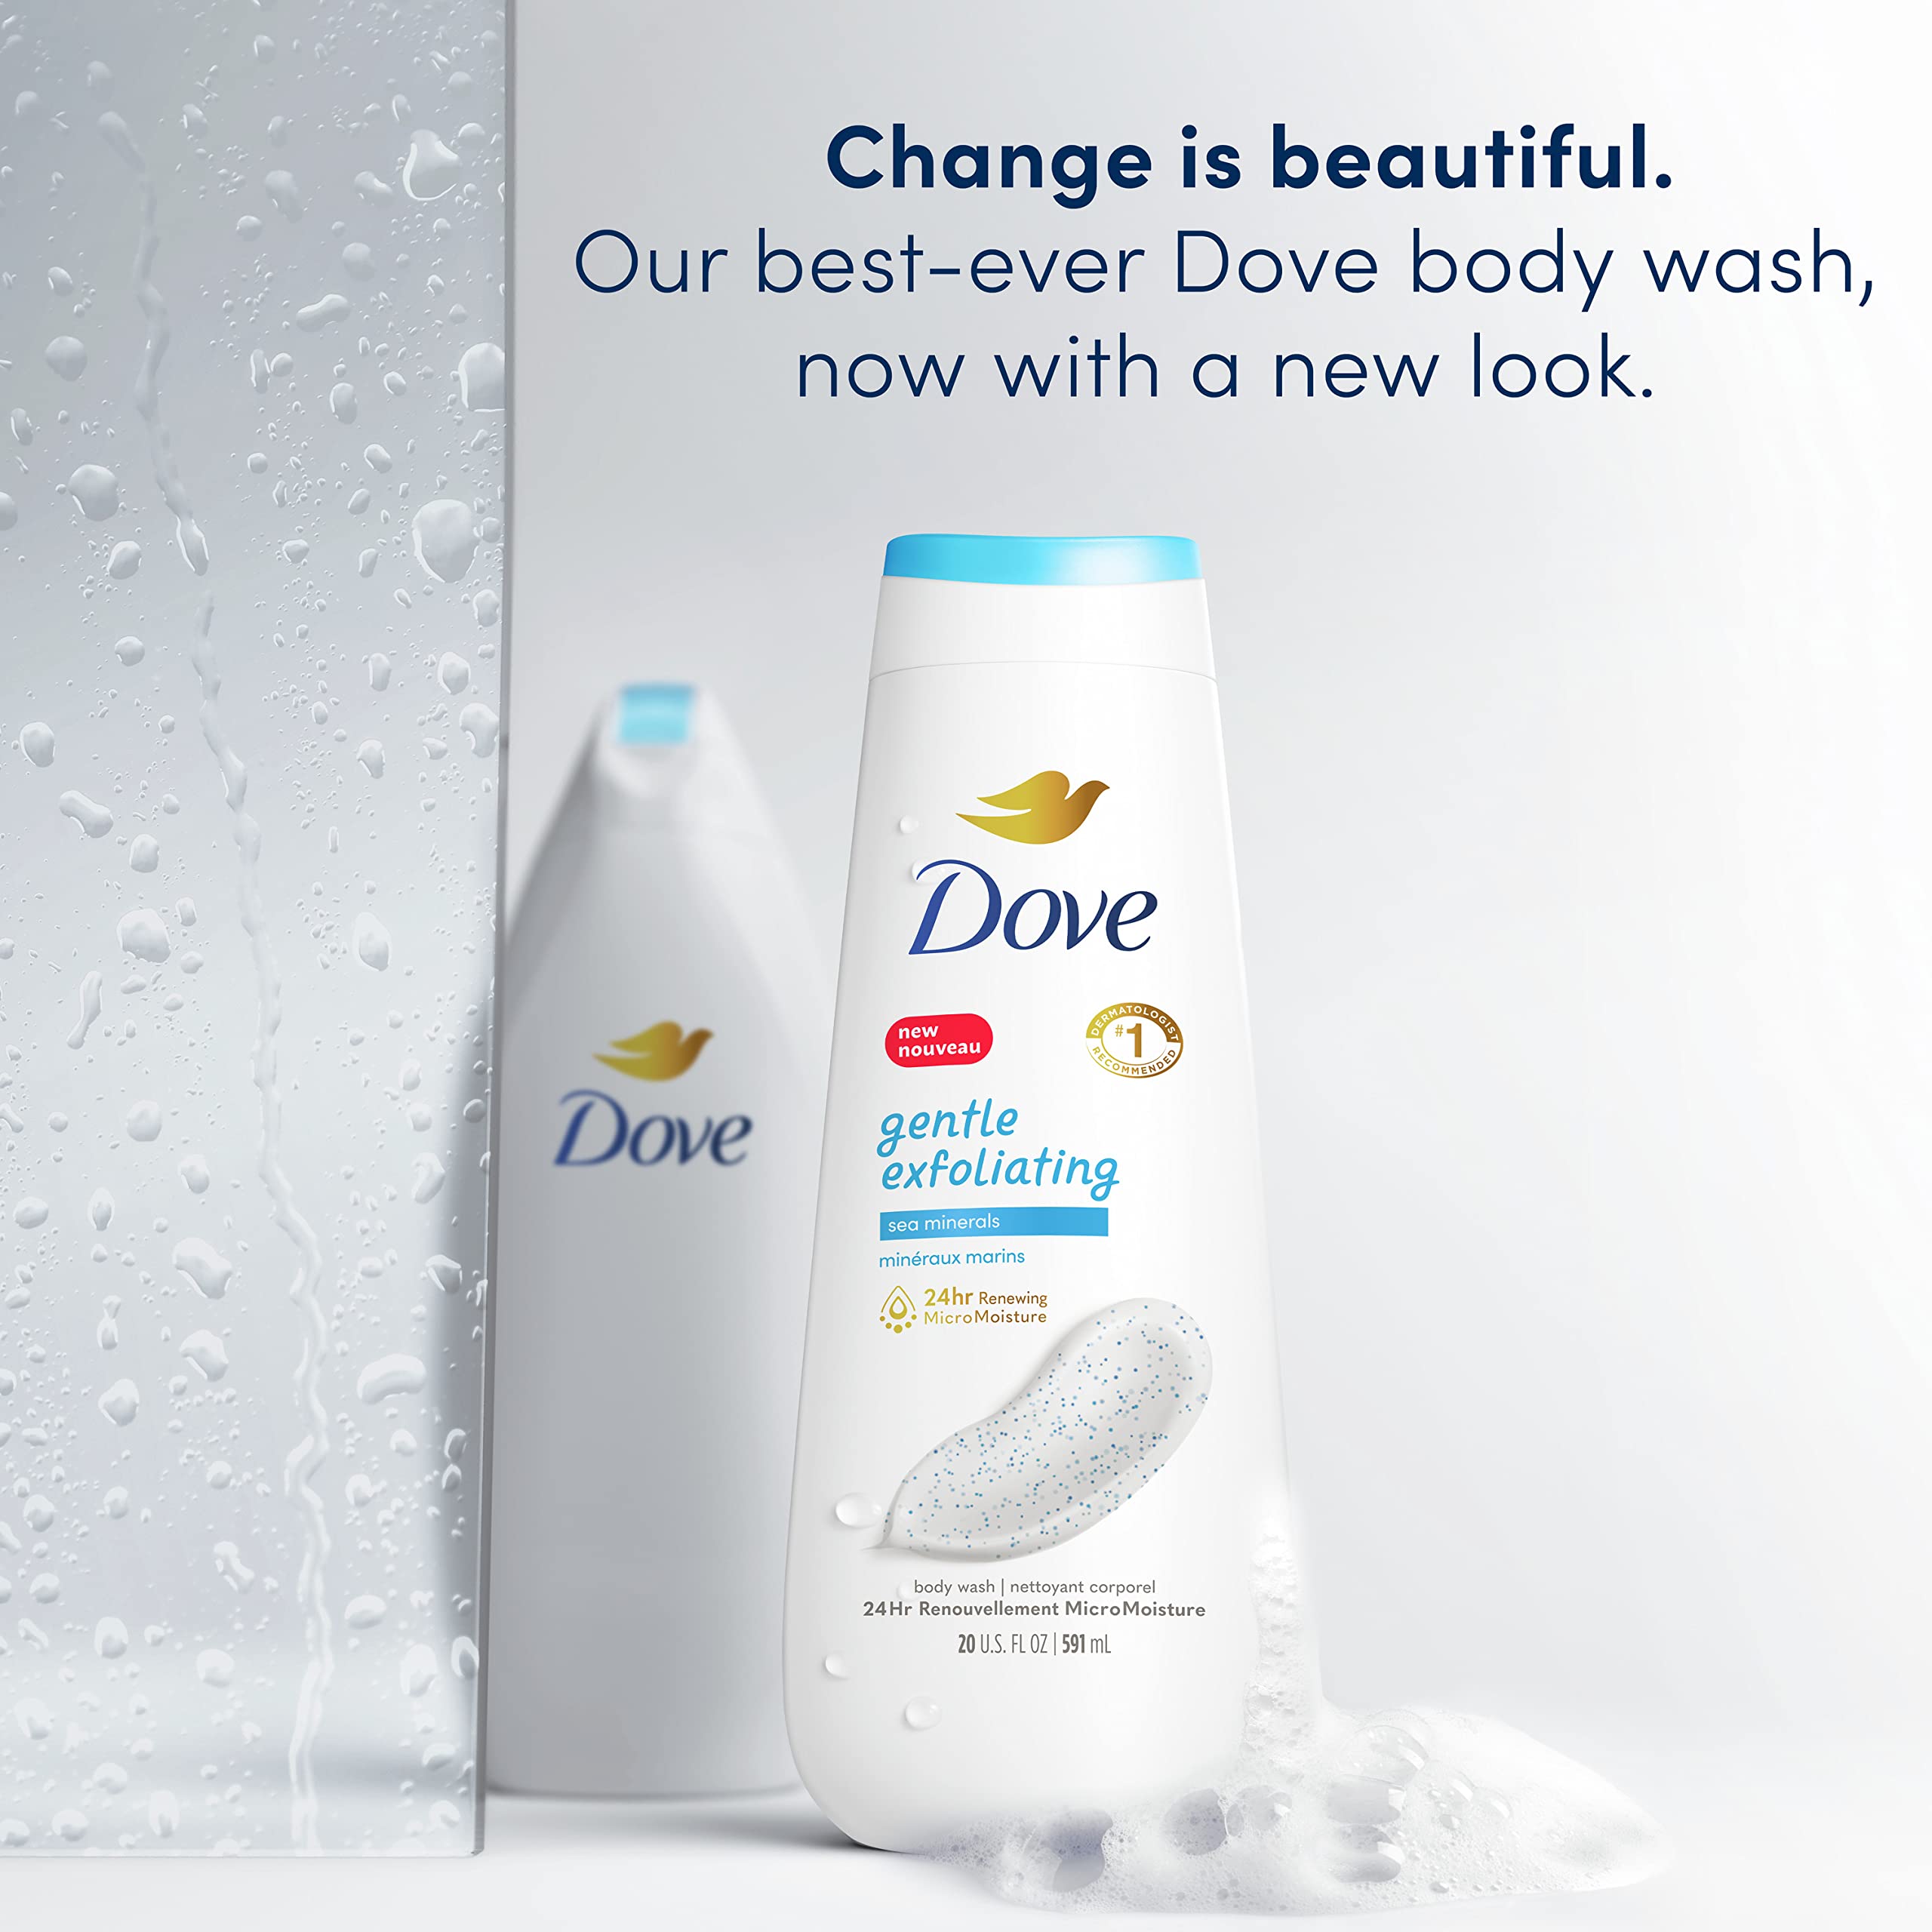 Dove Body Wash Gentle Exfoliating With Sea Minerals 4 Count Instantly Reveals Visibly Smoother Skin Cleanser That Effectively Washes Away Bacteria While Nourishing Your Skin 20 oz